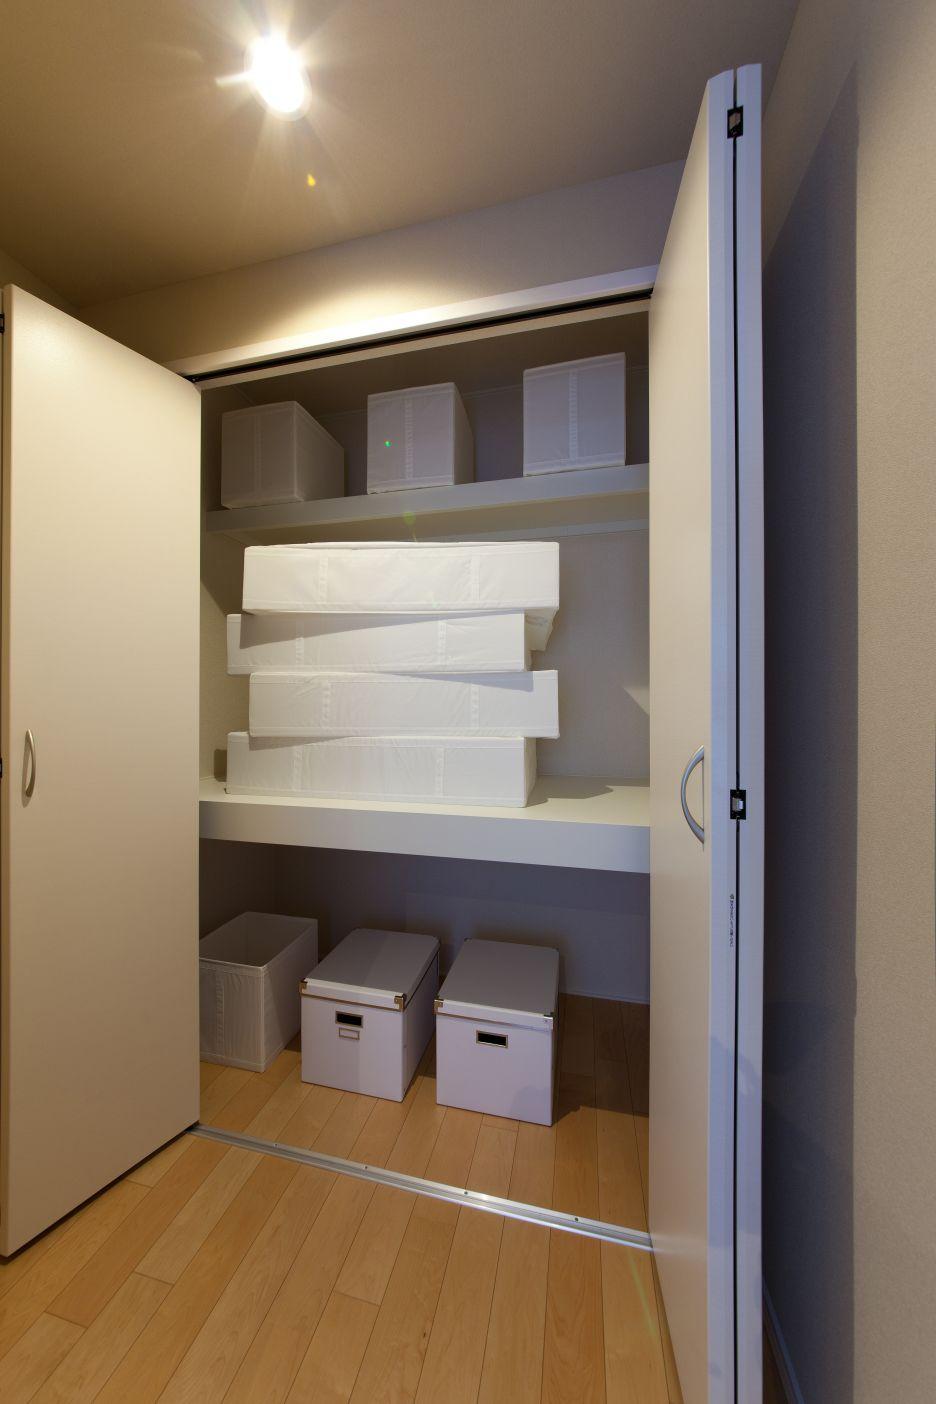 Other building plan example. By ensuring a sufficient storage space in each room, Will every day of organized is surely fun. 